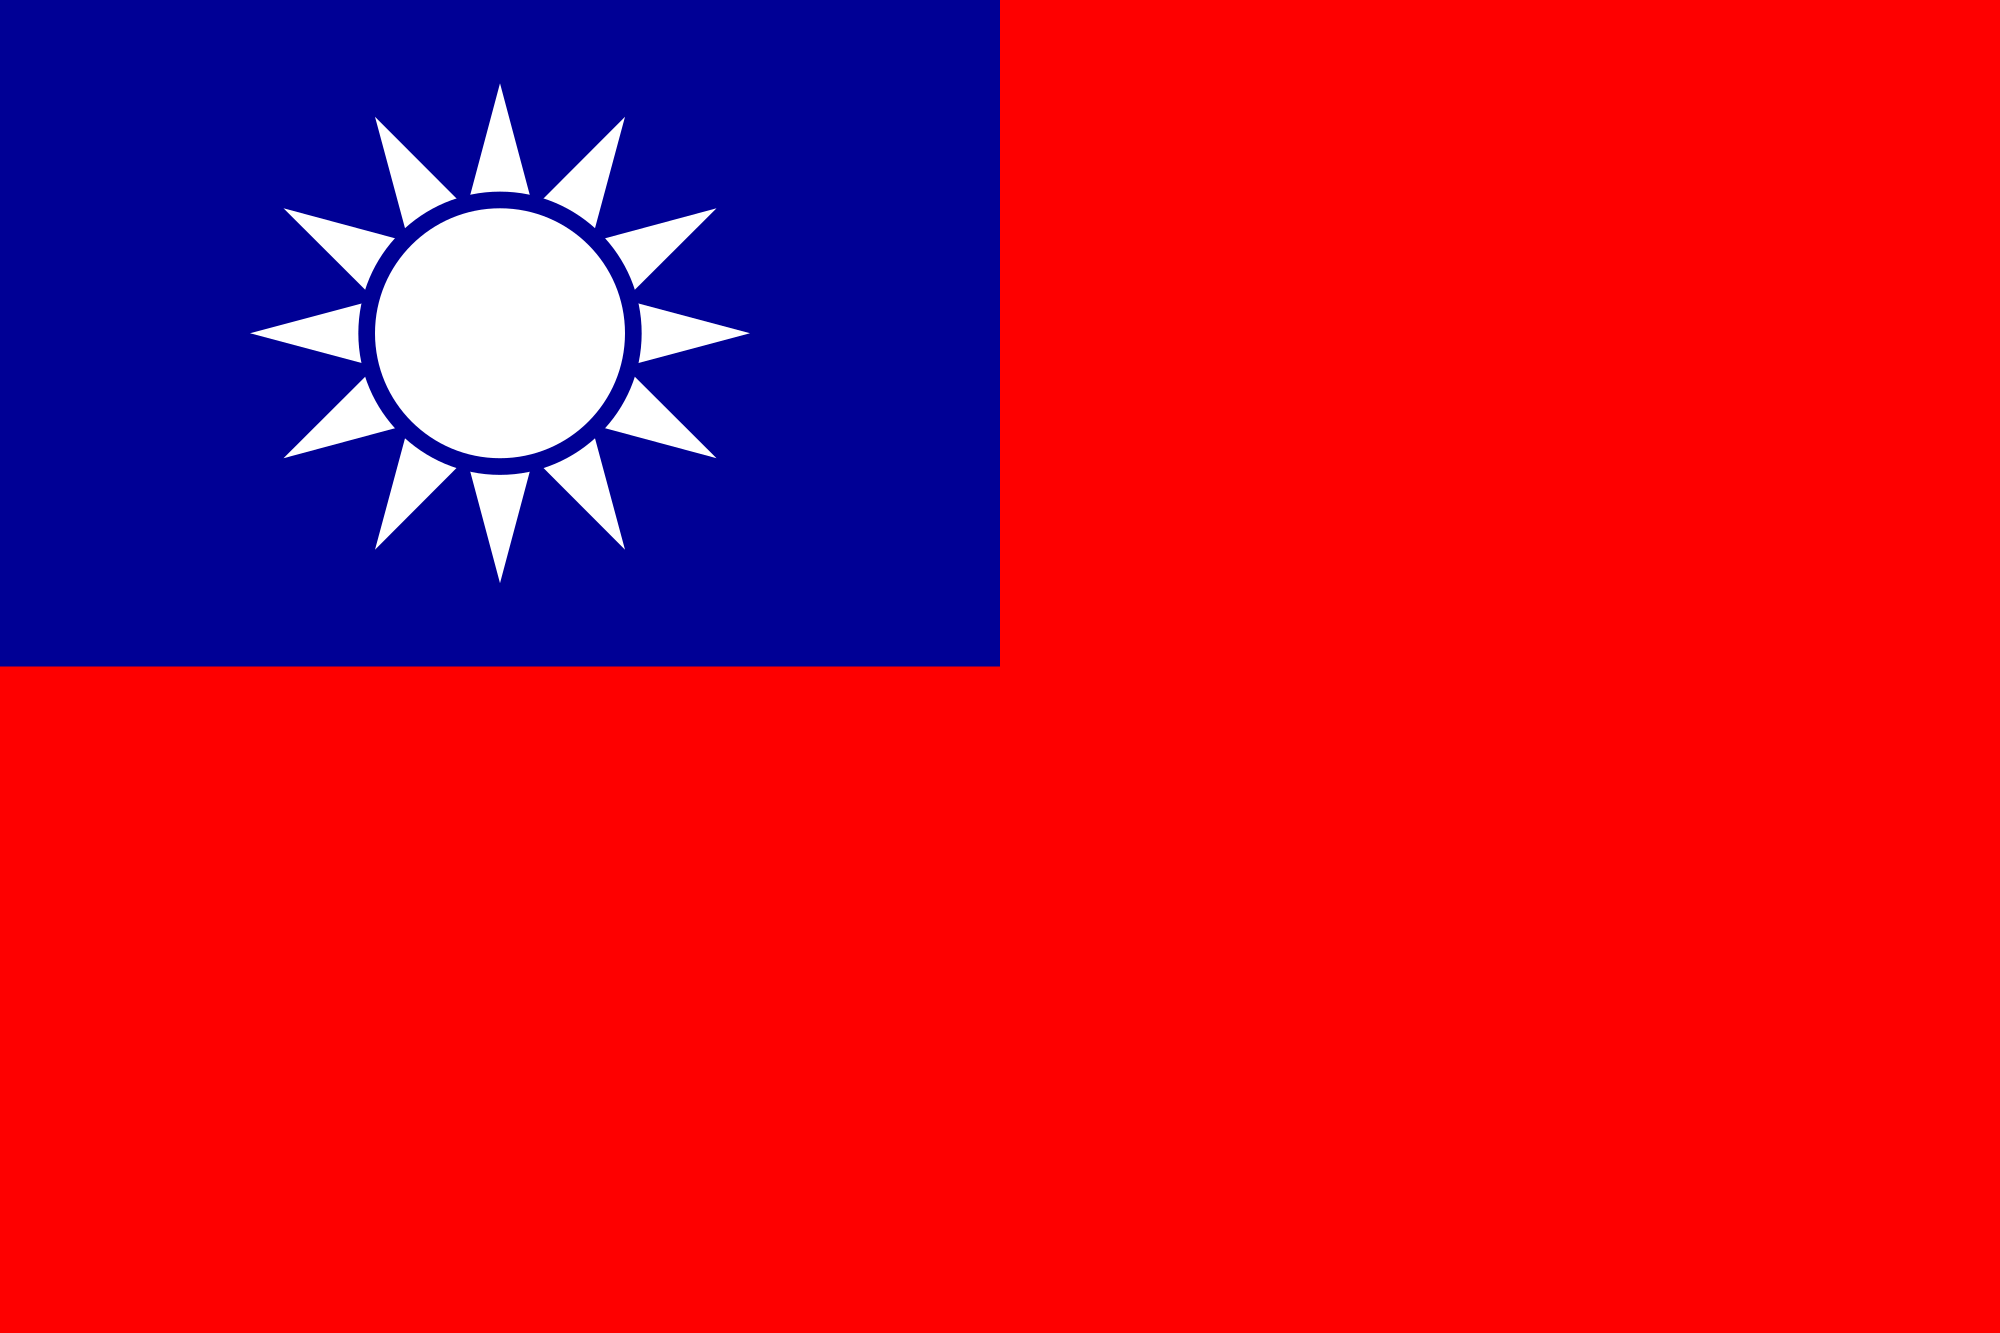 Red and Blue Square Logo - Flag of the Republic of China